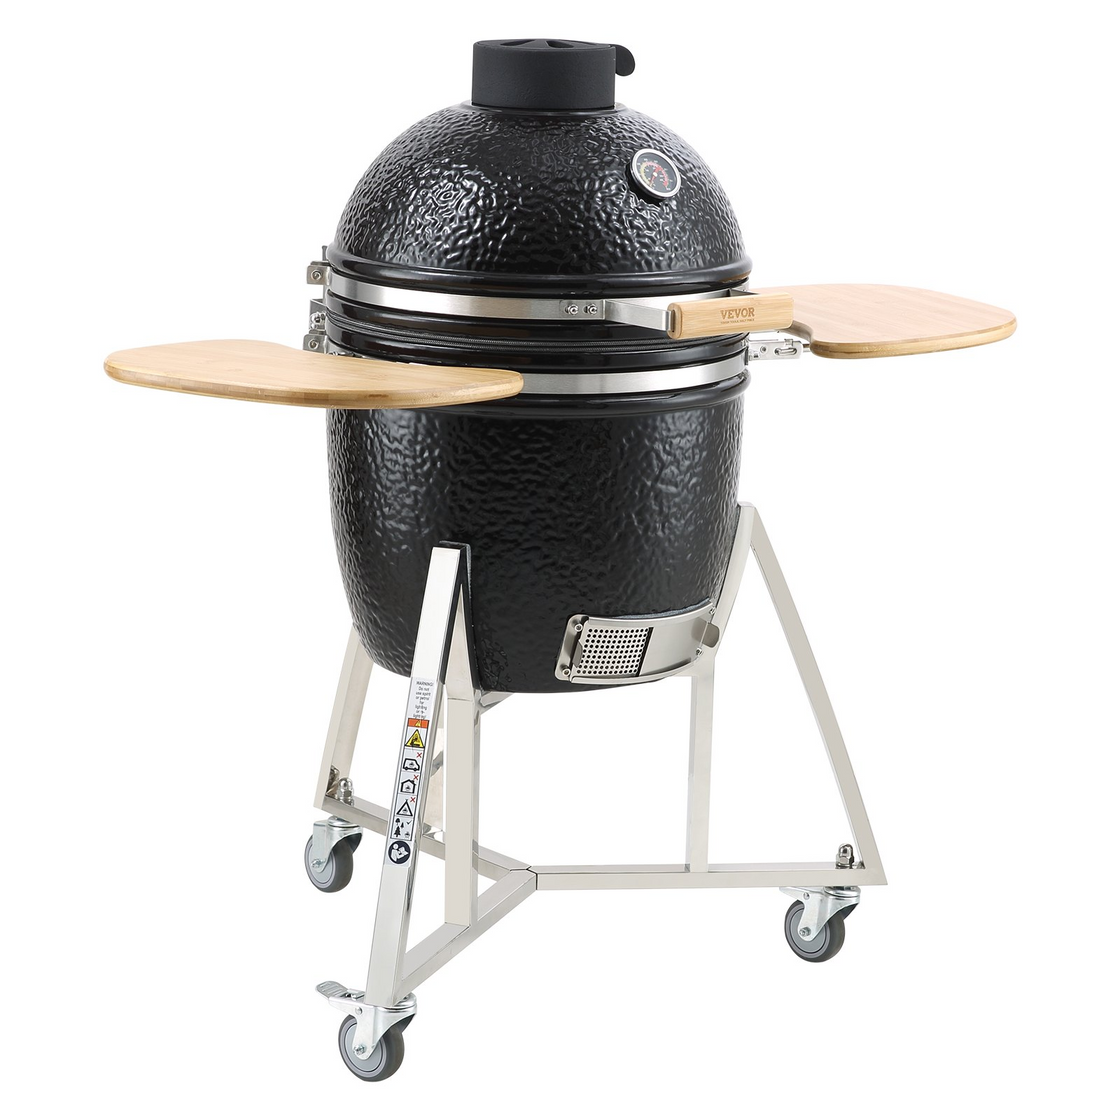 VEVOR 18" Ceramic Barbecue Grill Smoker Portable Round Outdoor Grill for Patio